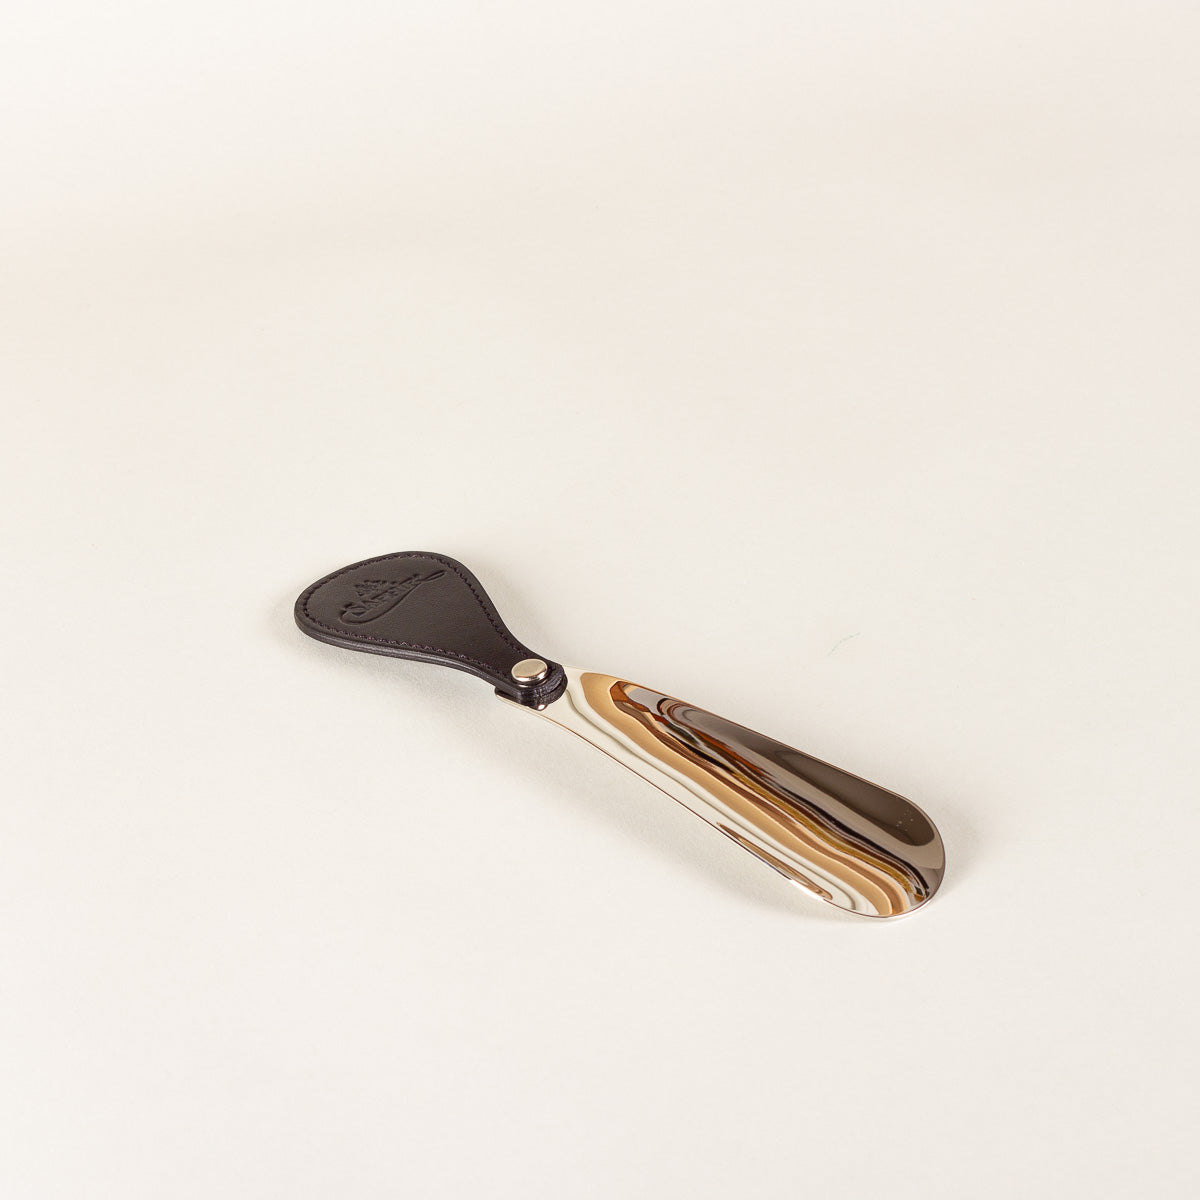 La Cordonnerie Anglaise Black leather and metal shoe horn